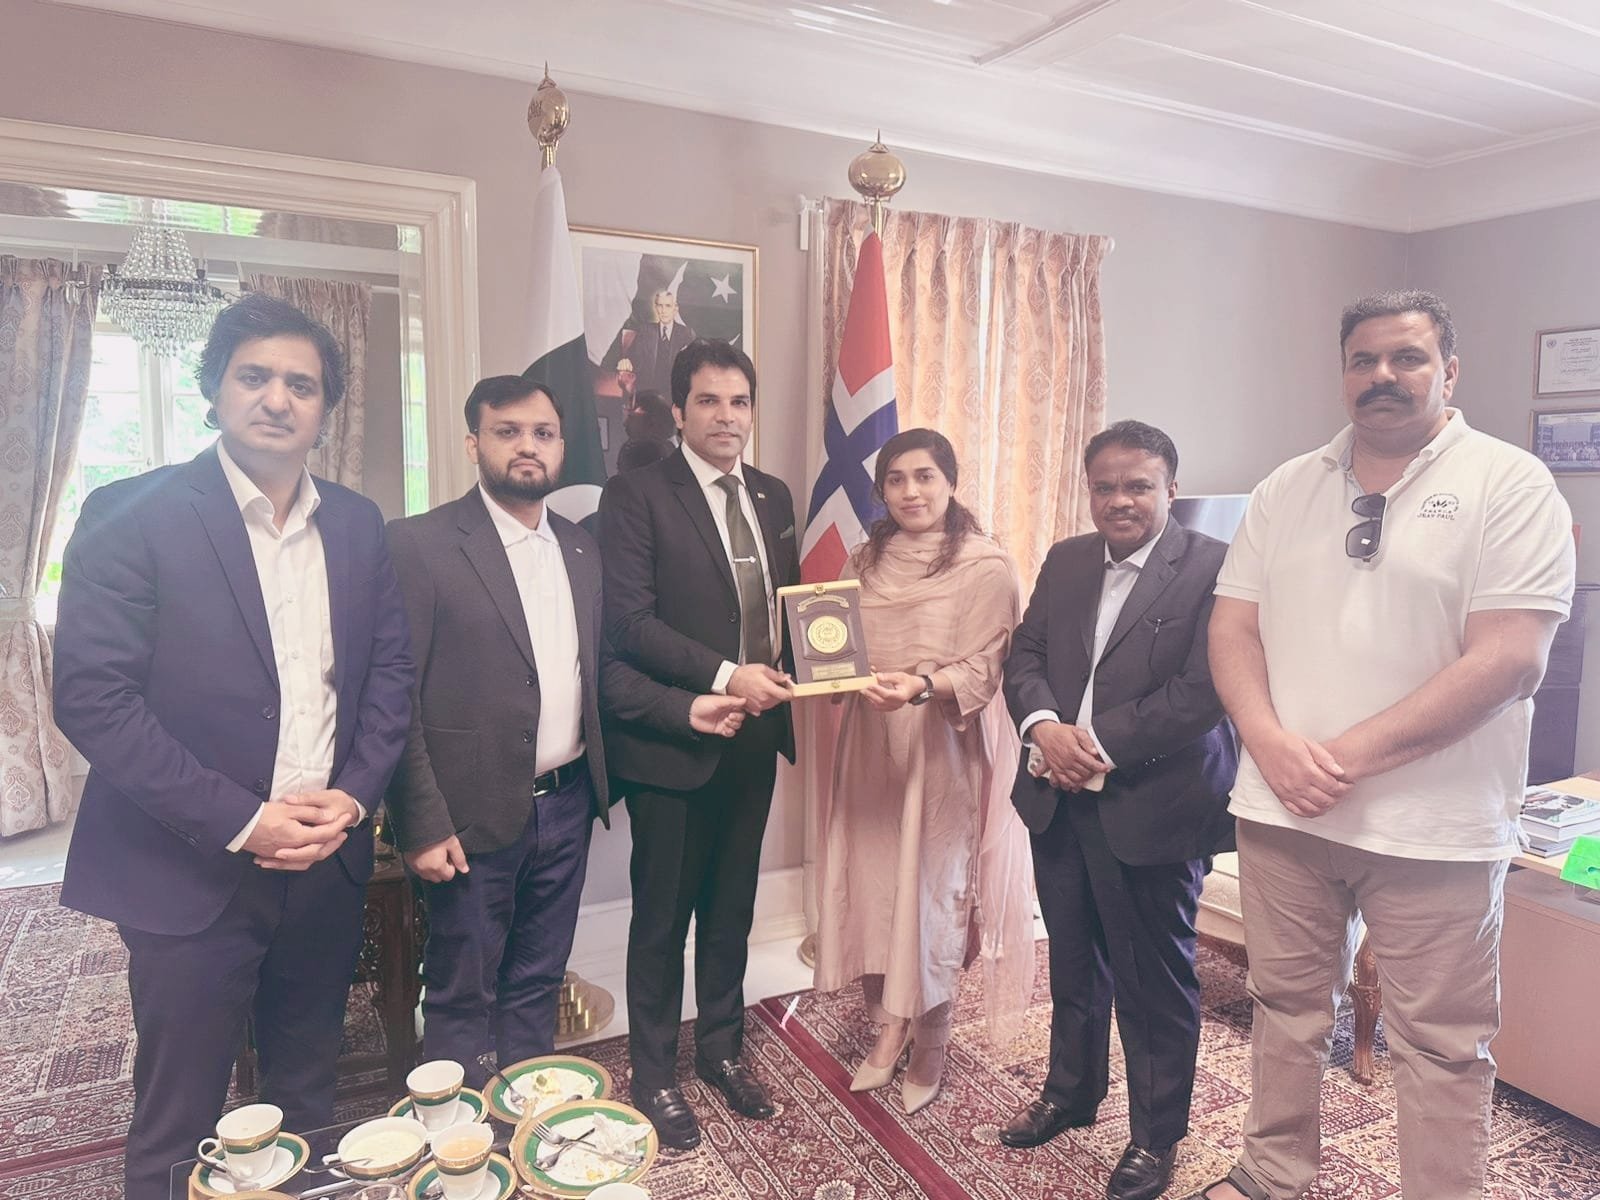 Mr. Sikander Ishfaq Razi #President of Gujrat Chamber of Commerce & Industry accompanied by #Senior_Vice_President Chaudhry M Asad Bhatti and #Vice_President Mr. Muhammad Masoom Qamar, met with H.E  Dr. Rabail Mustafa Soomro, Deputy Head of Mission and Acting #Ambassador of #Pakistan Embassy in #Norway, and Mr. Asif Hameed, Commercial Councillor.